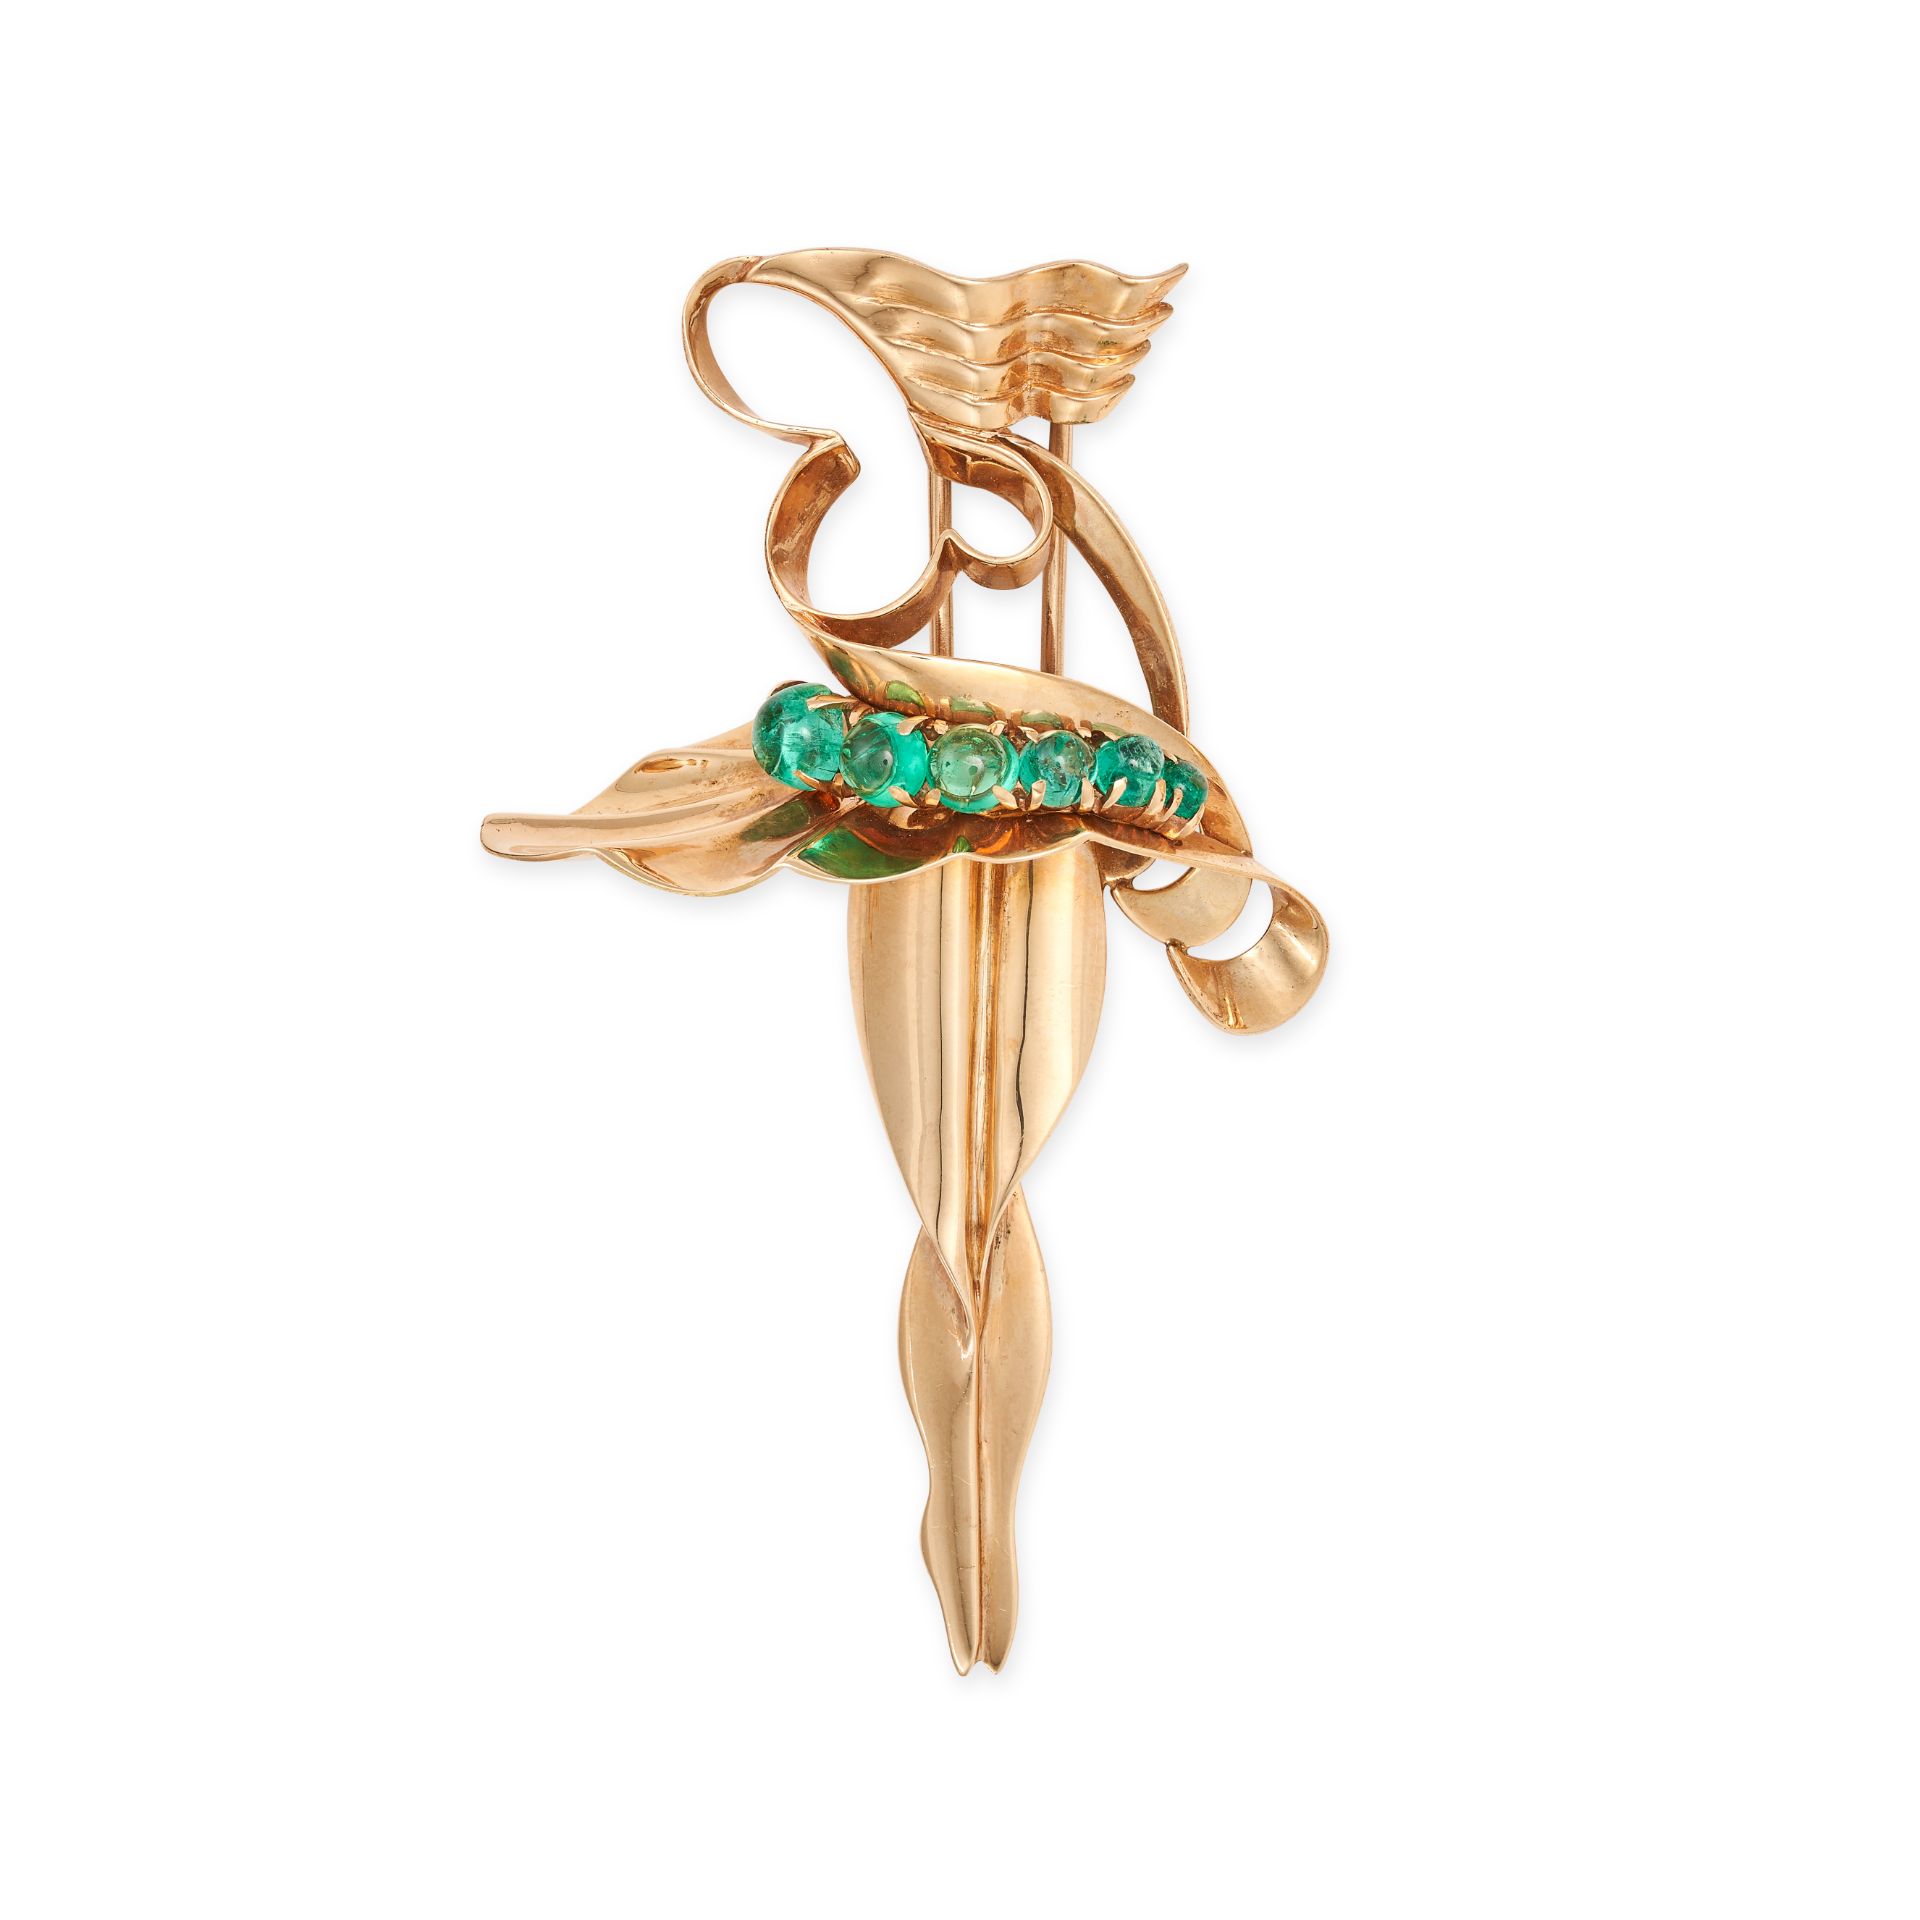 NO RESERVE - A VINTAGE EMERALD STYLISED BALLERINA BROOCH in 14ct yellow gold, designed as a styli...